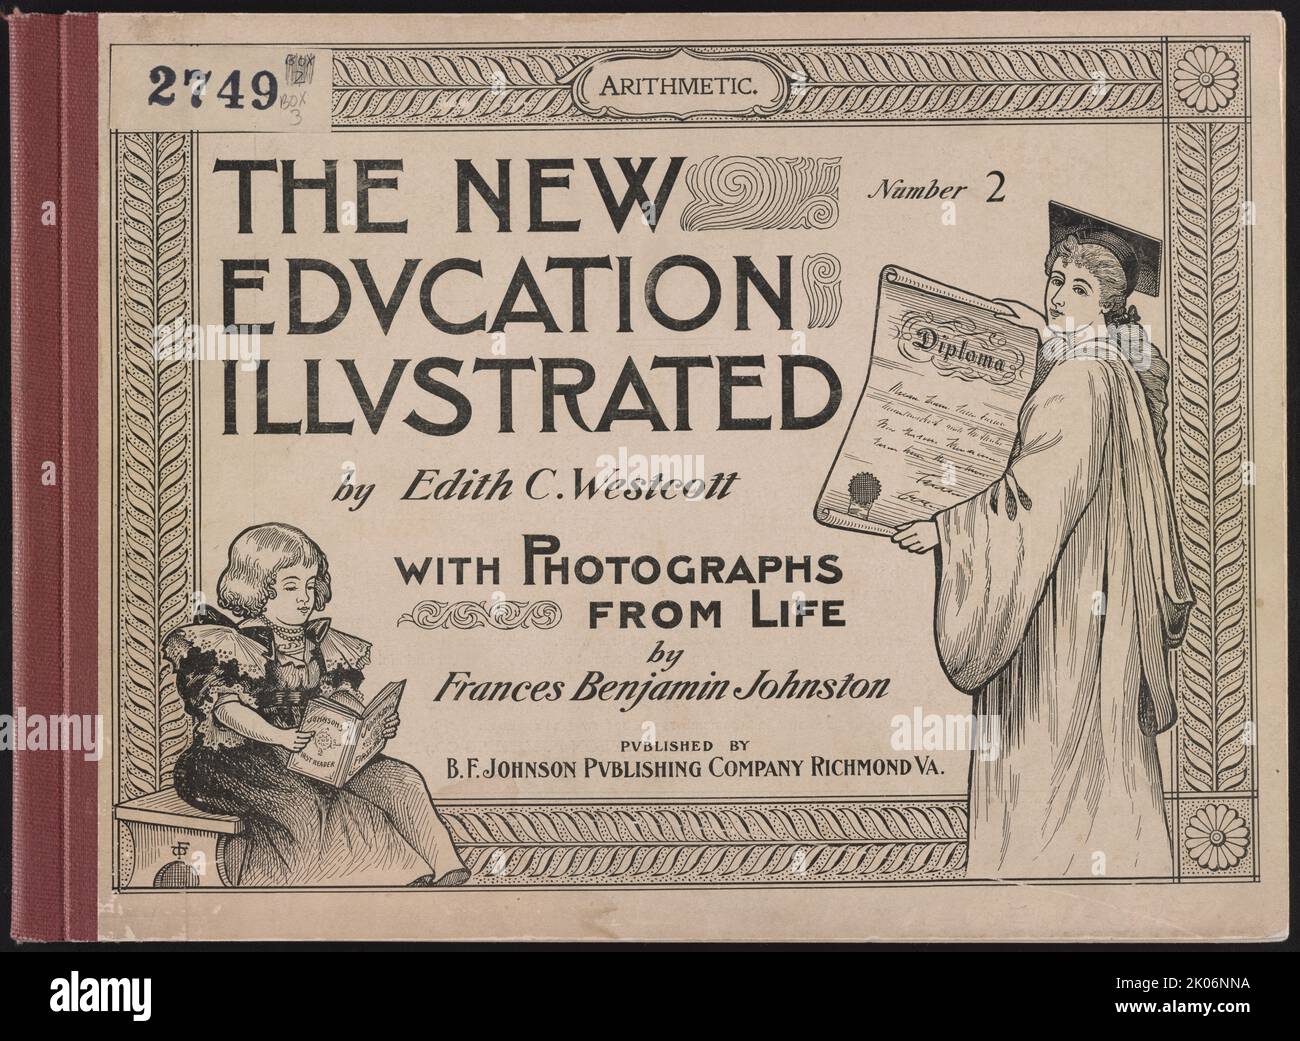 &quot;The New Education Illustrated&quot; by Edith C. Westcott, with photographs from life by Frances Benjamin Johnston, Number 2 - Arithmetic, 1900. Illustrated cover showing a young woman, wearing an academic mortarboard and gown, holding a diploma, and a young girl reading a book. Stock Photo